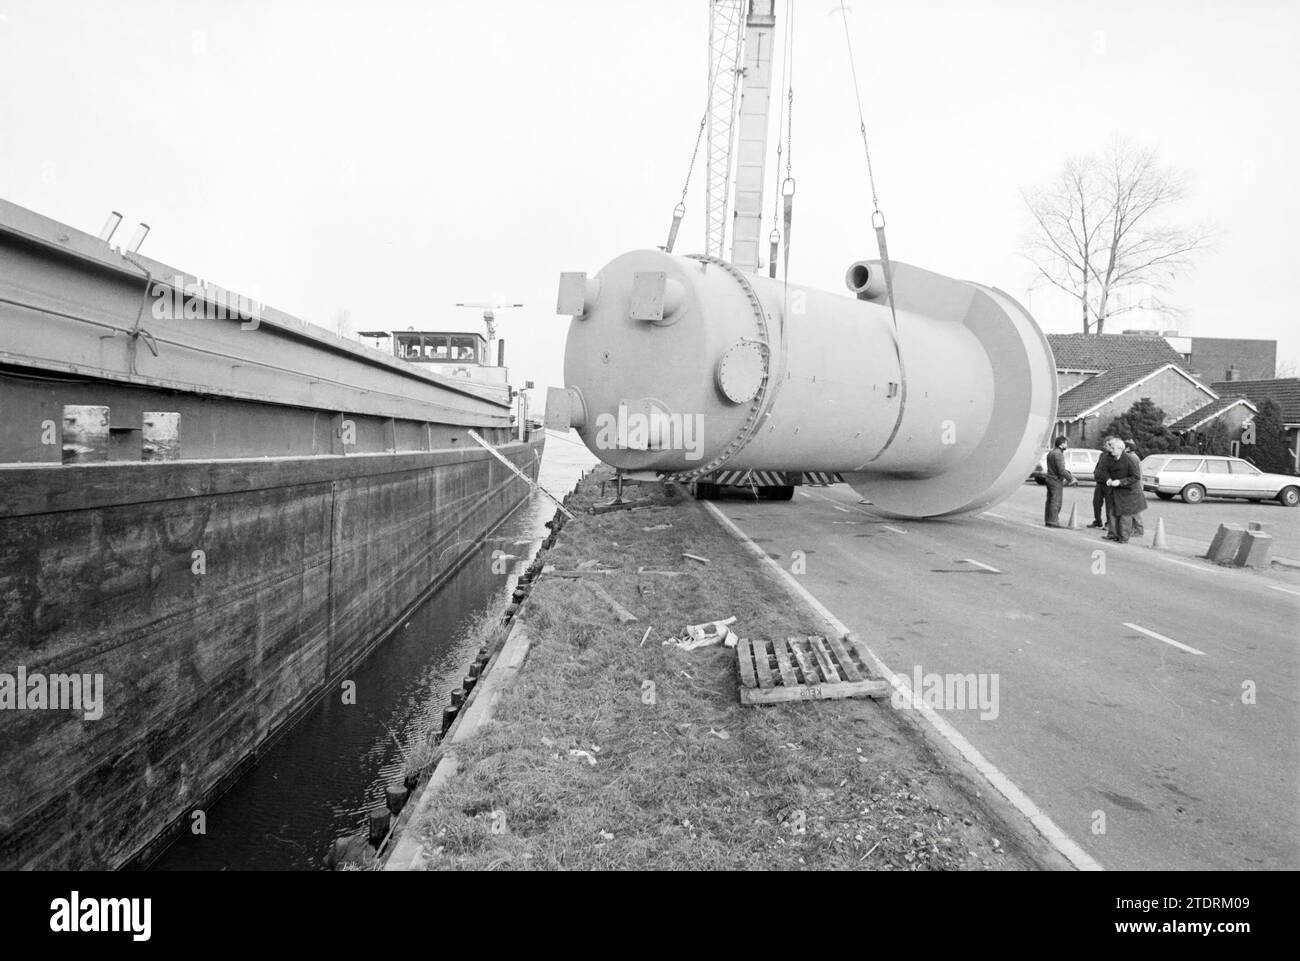 Boilers on boats Cruquius Canal, Transport, transport companies, 04-02-1986, Whizgle News from the Past, Tailored for the Future. Explore historical narratives, Dutch The Netherlands agency image with a modern perspective, bridging the gap between yesterday's events and tomorrow's insights. A timeless journey shaping the stories that shape our future Stock Photo